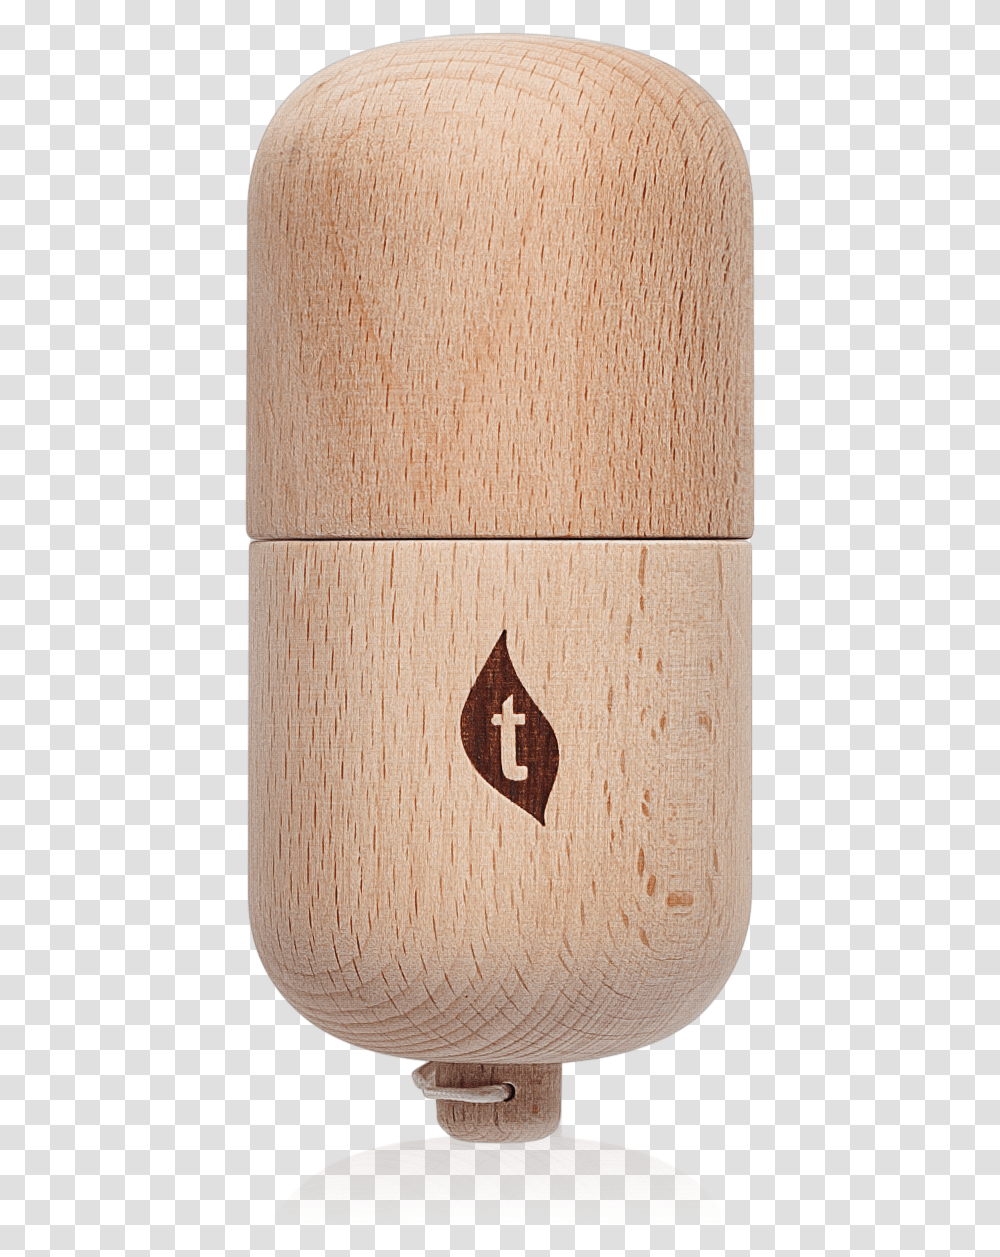 Natural BeechClass Lazyload Lazyload Mirage Primary Computer Speaker, Lamp, Wood, Box, Plywood Transparent Png